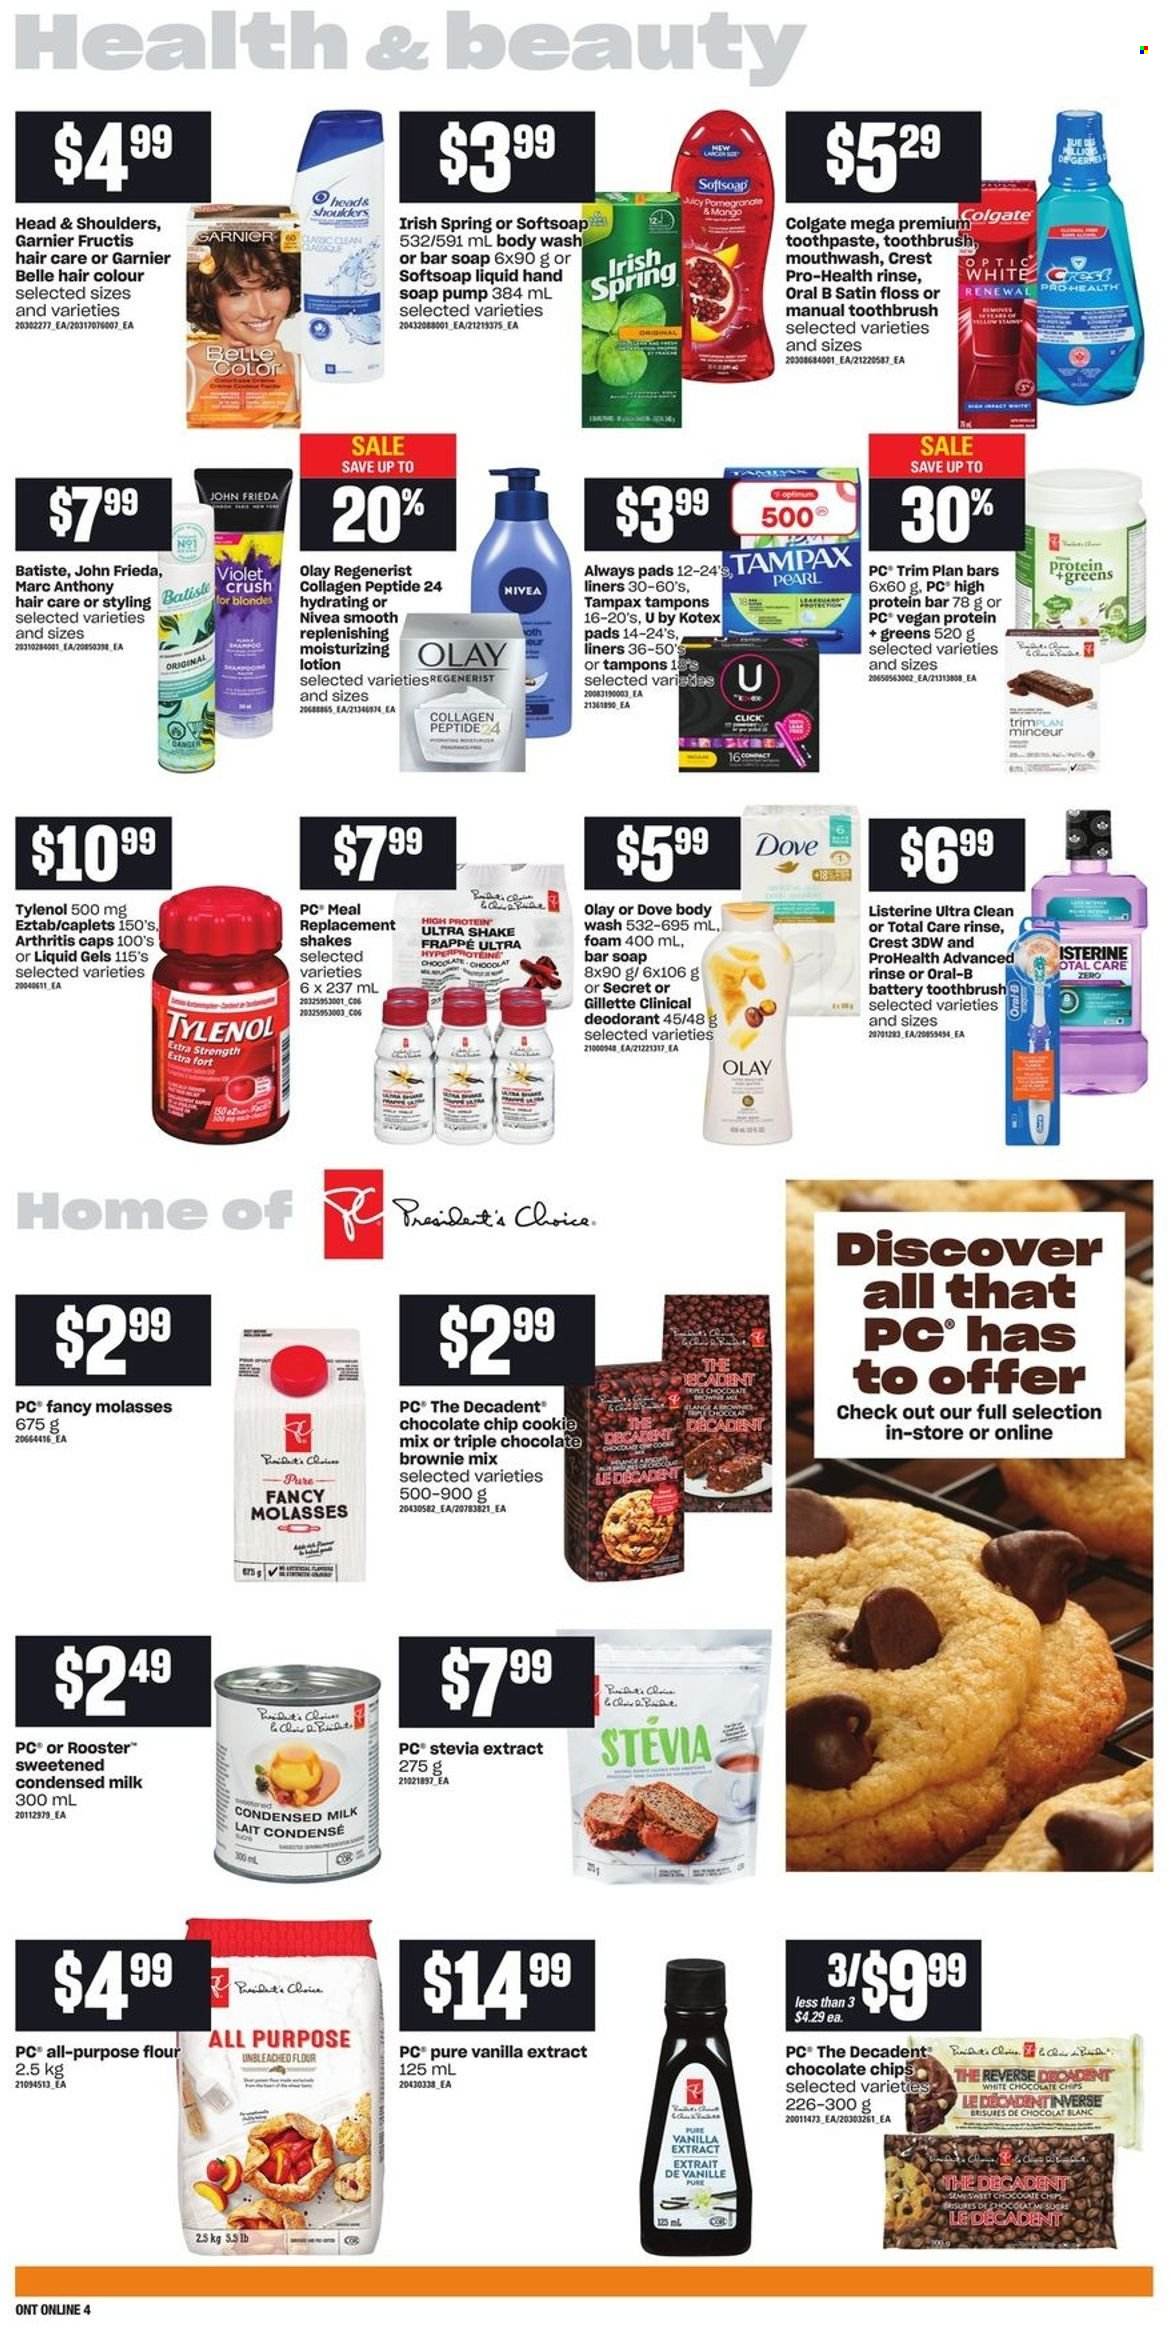 thumbnail - Loblaws Flyer - January 06, 2022 - January 12, 2022 - Sales products - brownie mix, mango, milk, condensed milk, shake, flour, vanilla extract, stevia, protein bar, molasses, body wash, Softsoap, hand soap, soap bar, soap, toothbrush, toothpaste, mouthwash, Crest, Always pads, Kotex, Kotex pads, tampons, Olay, hair color, John Frieda, Fructis, body lotion, anti-perspirant, Optimum, Tylenol, Dove, Colgate, Garnier, Gillette, Listerine, Tampax, Head & Shoulders, Nivea, Oral-B, deodorant. Page 8.